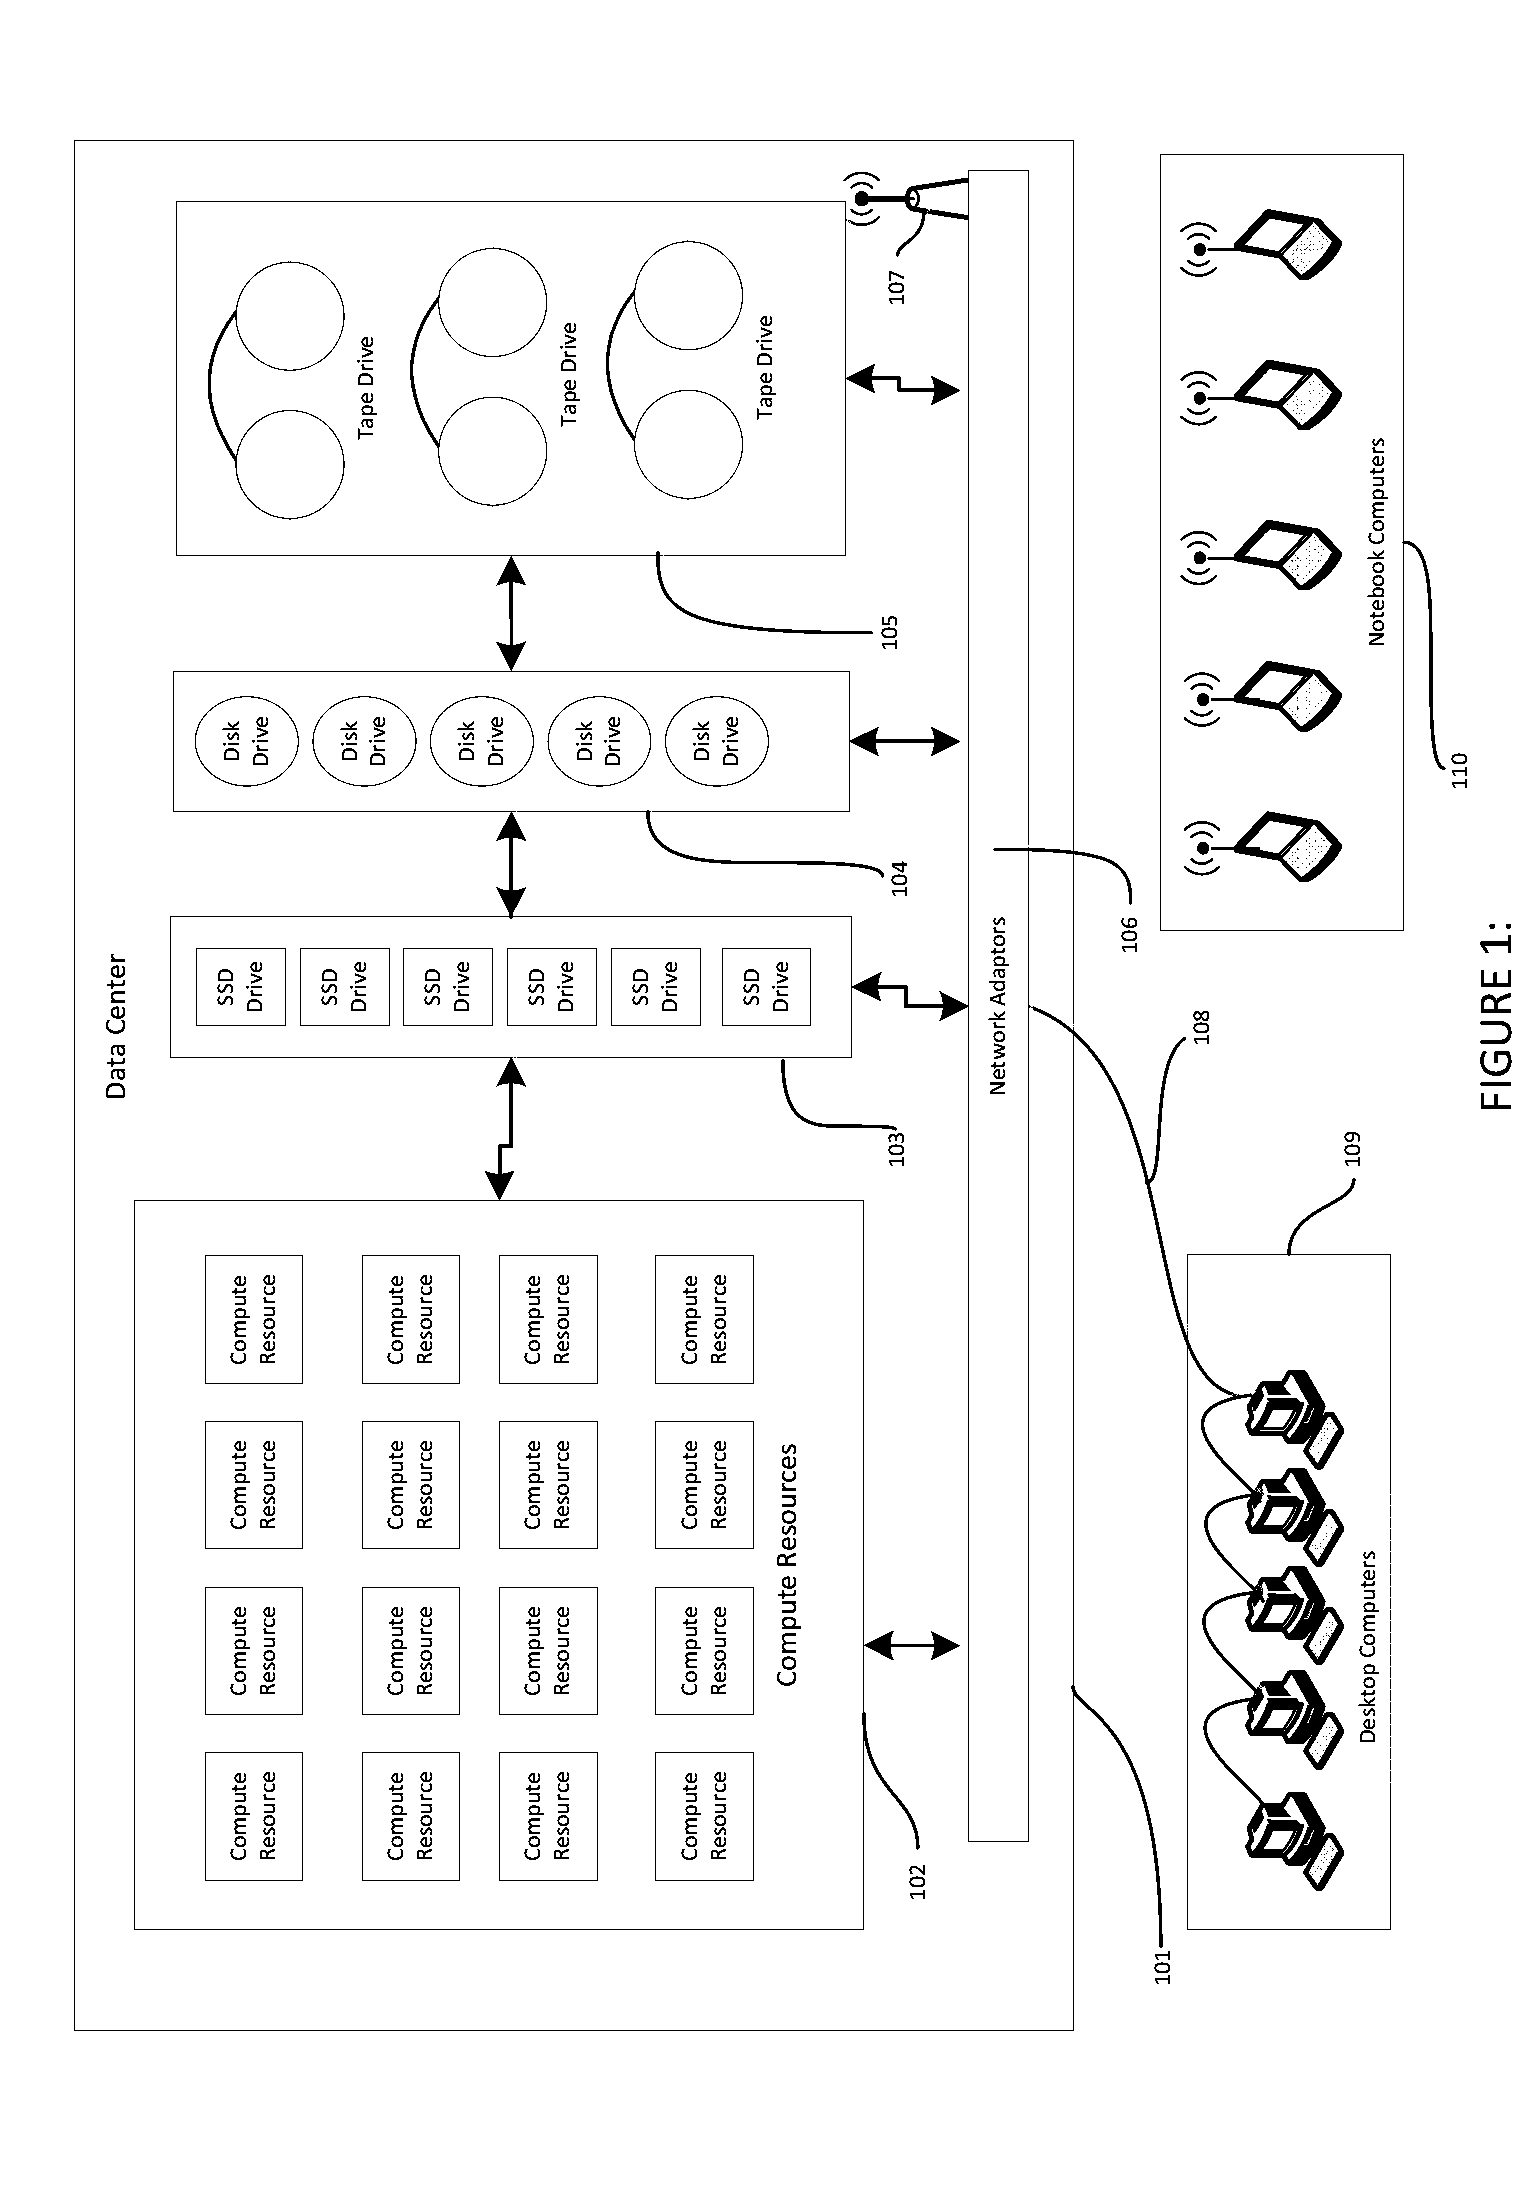 Dynamic Assembly and Dispatch of Controlling Software